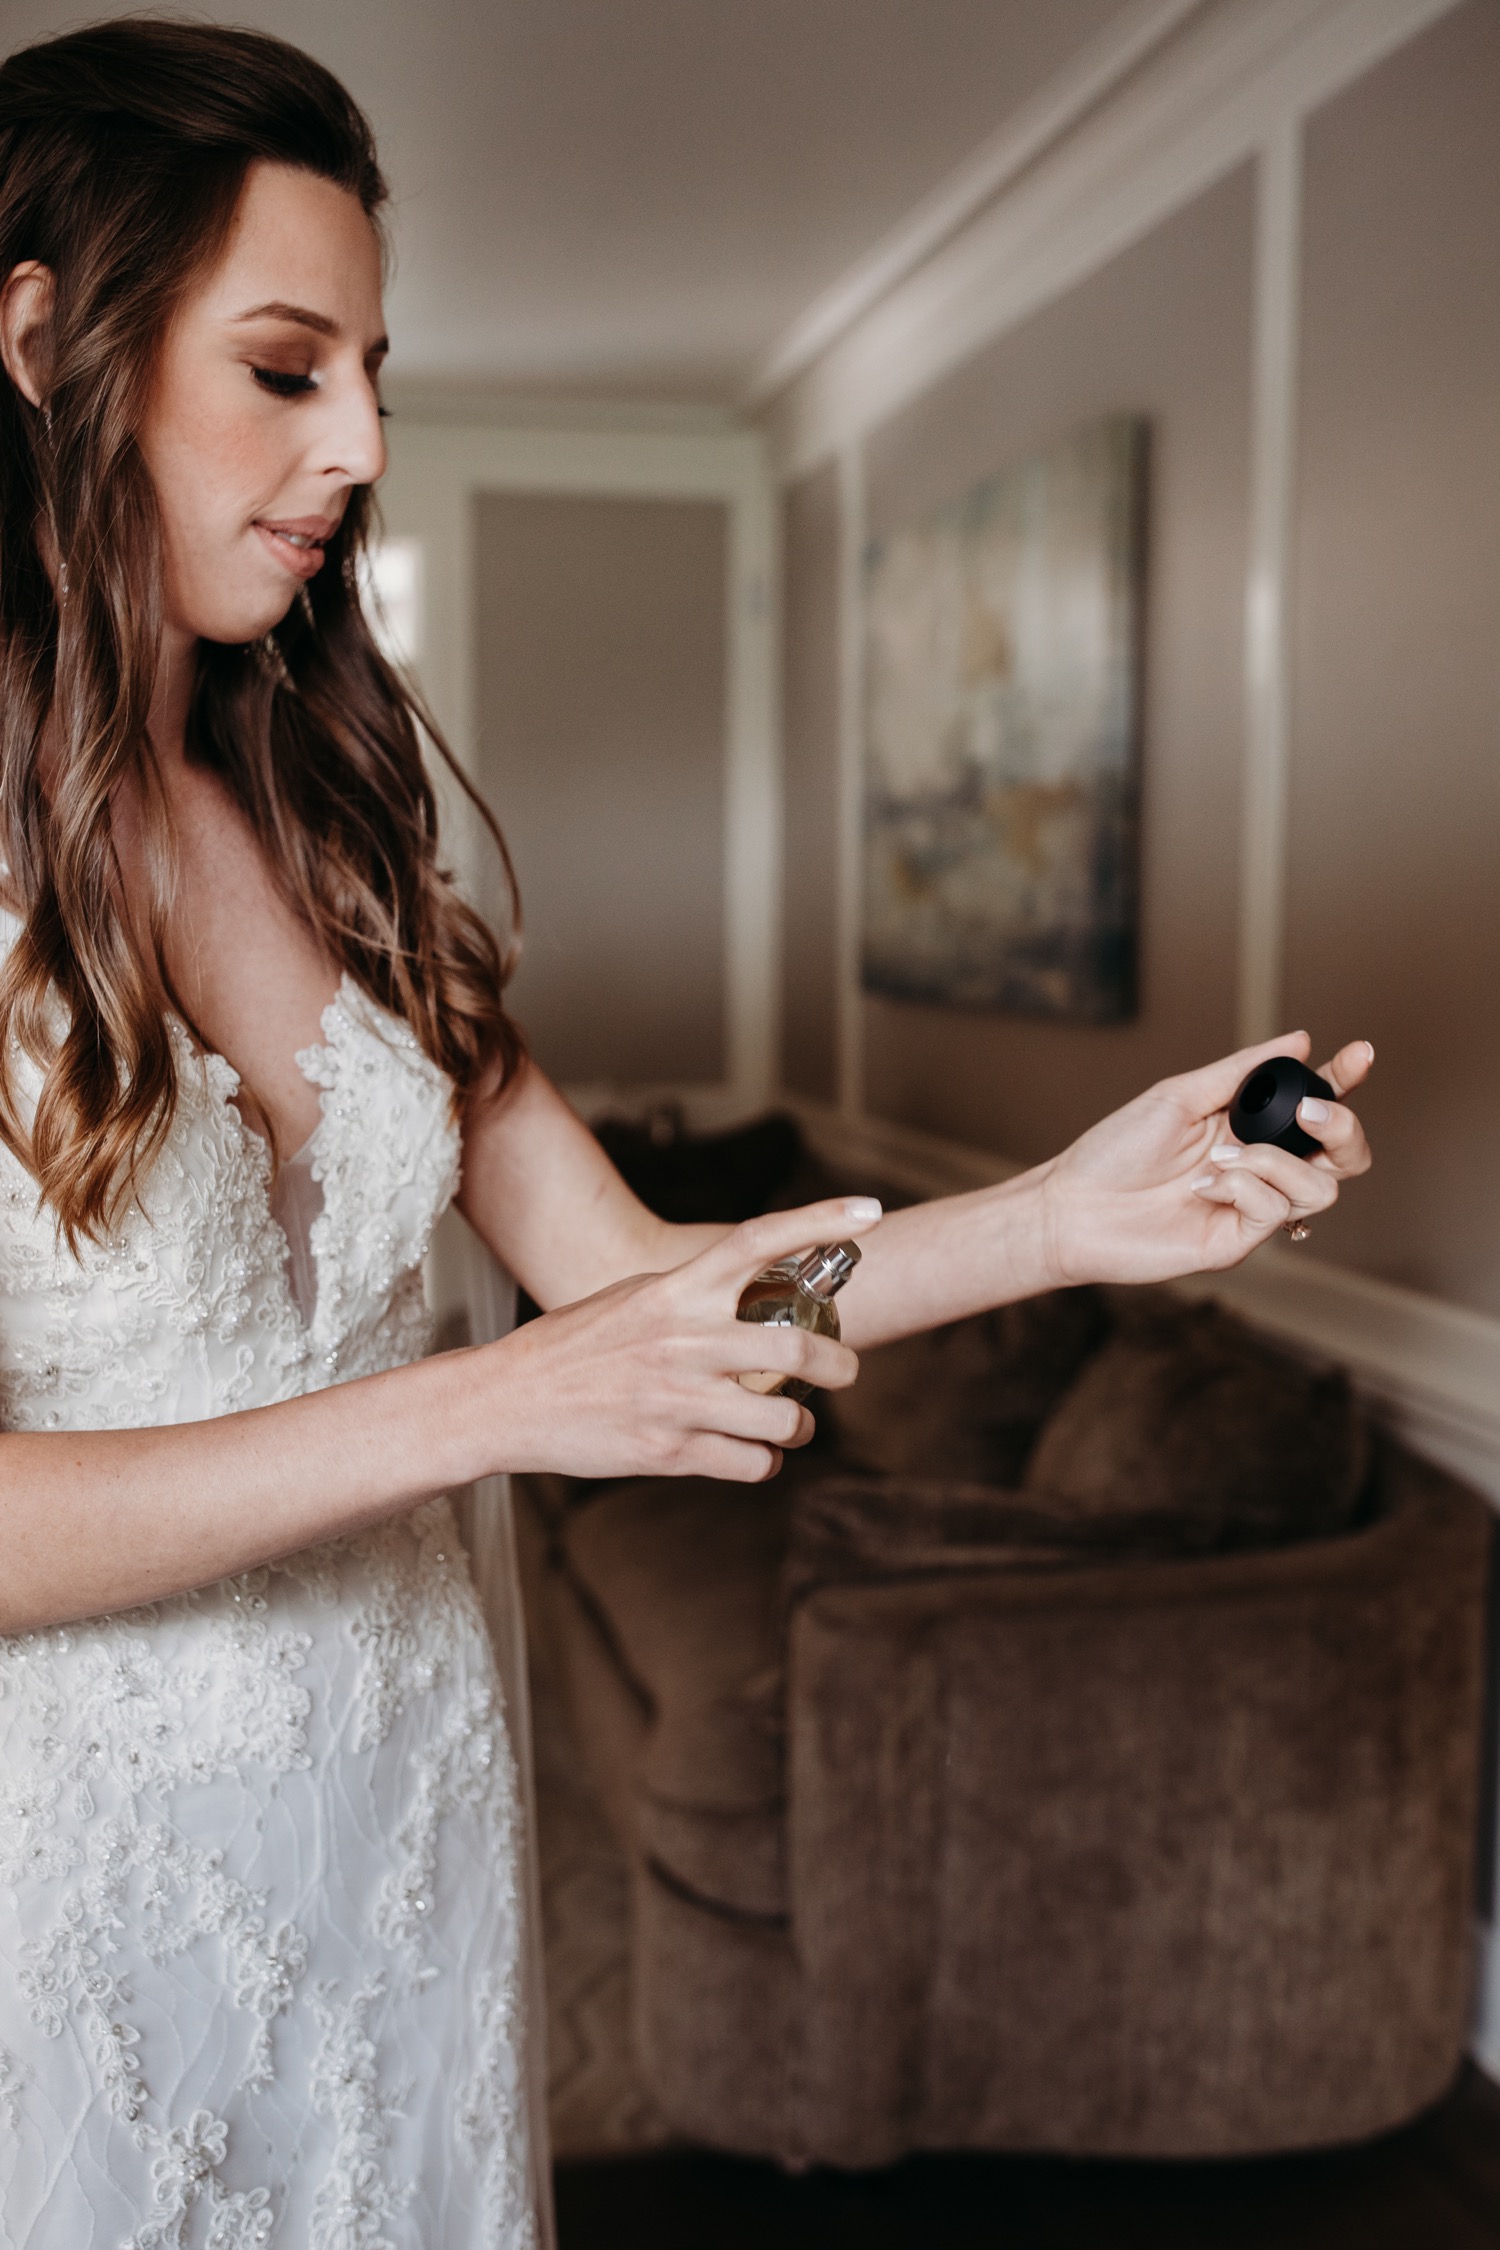 Bride sprays perfume on her wrist as she gets ready for her wedding at The Maples in Woodland, CA